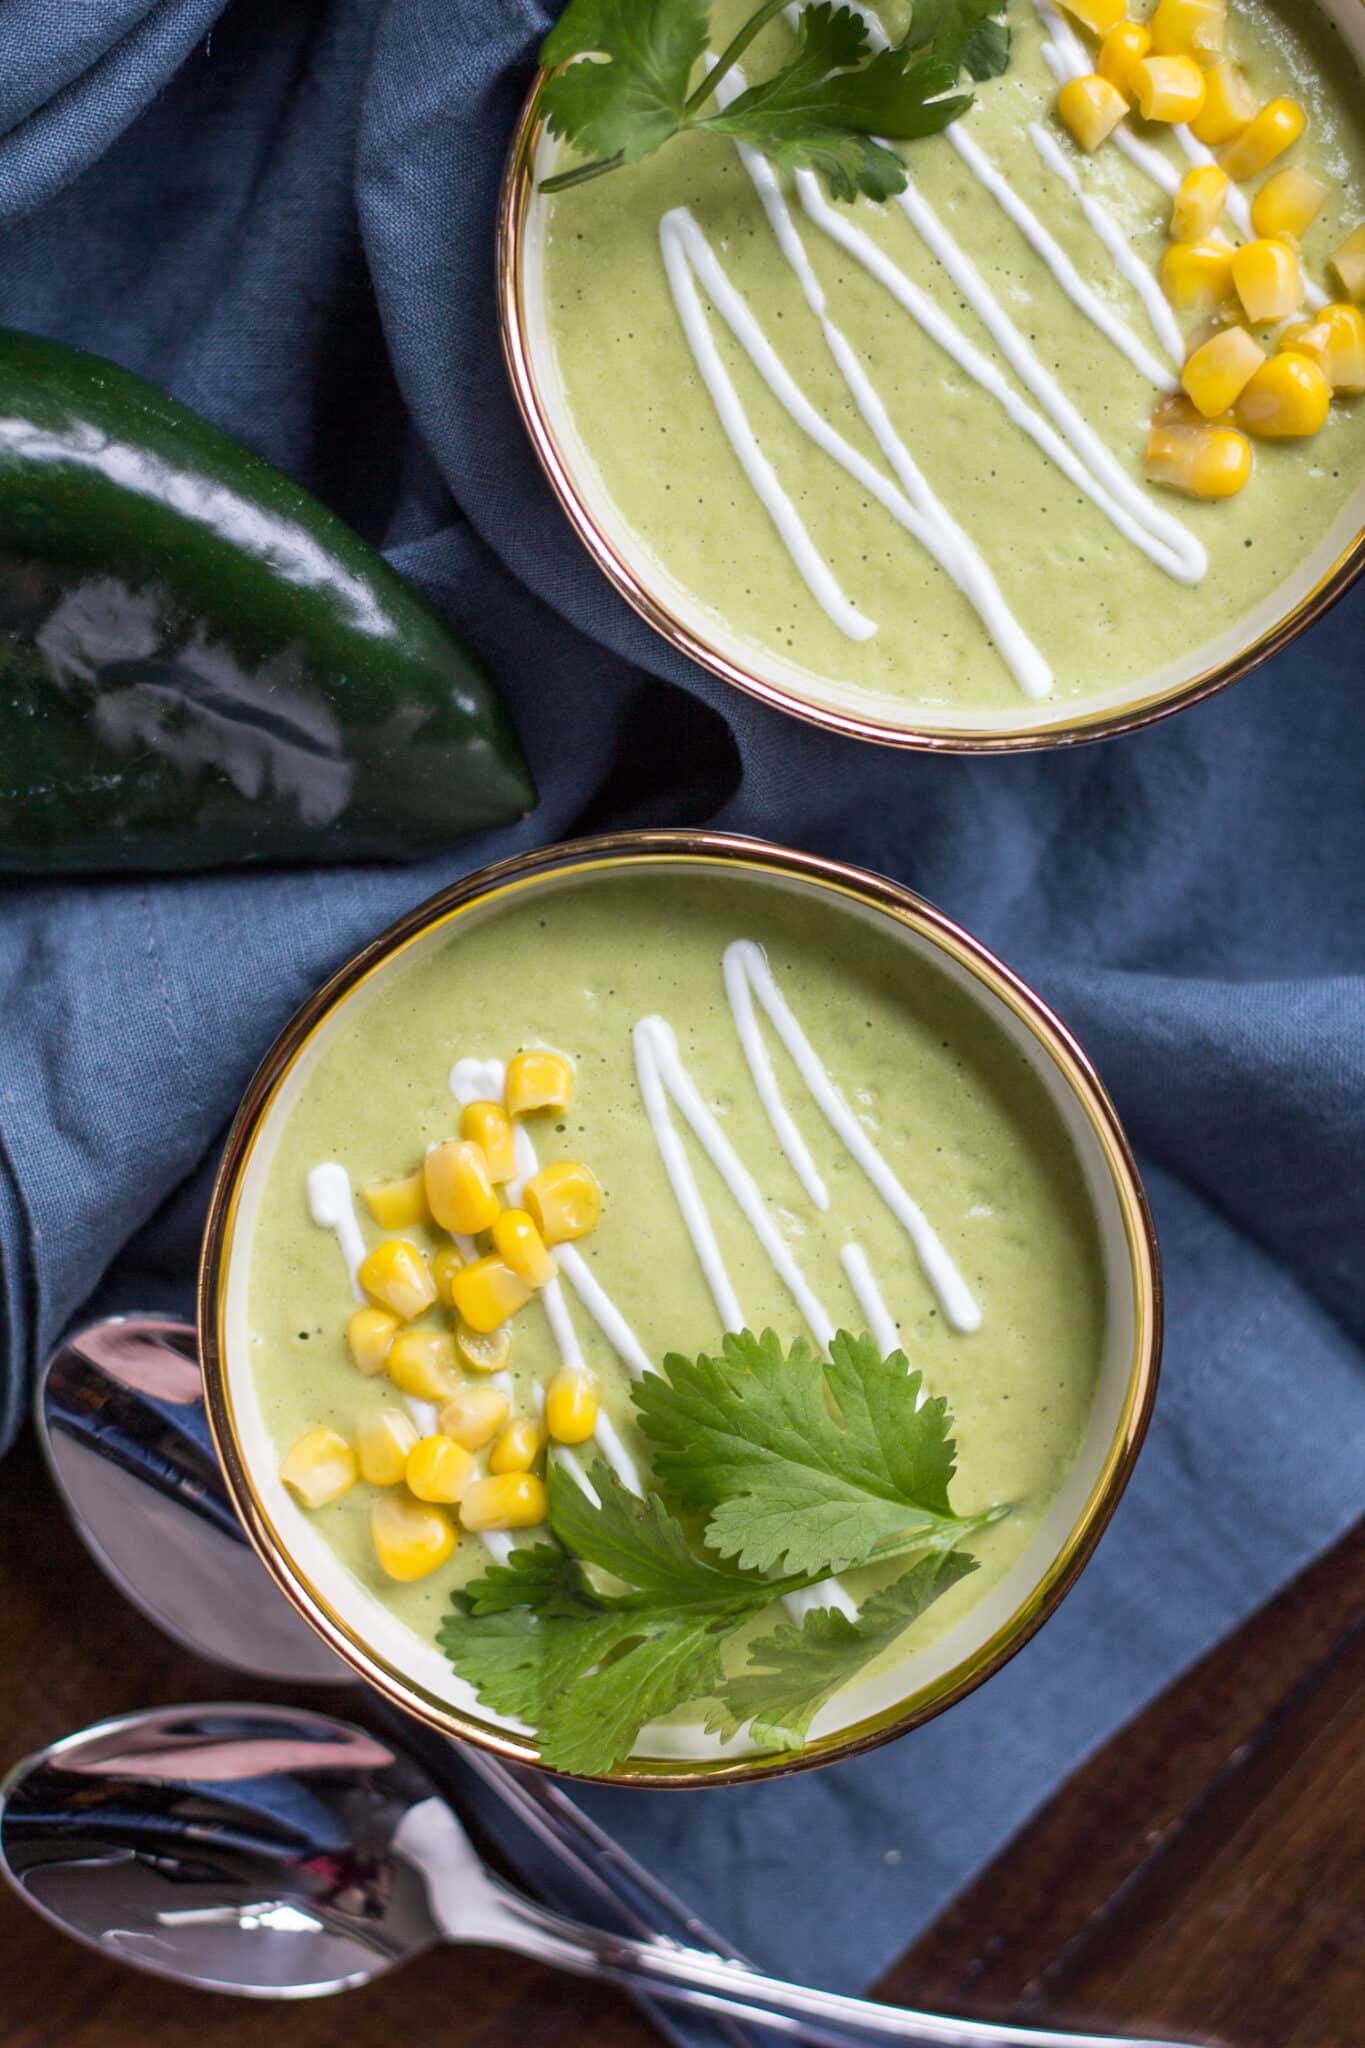 2 bowls of Avocado Poblano Soup on a blue cloth, garnished with cilantro, sour cream, and corn.